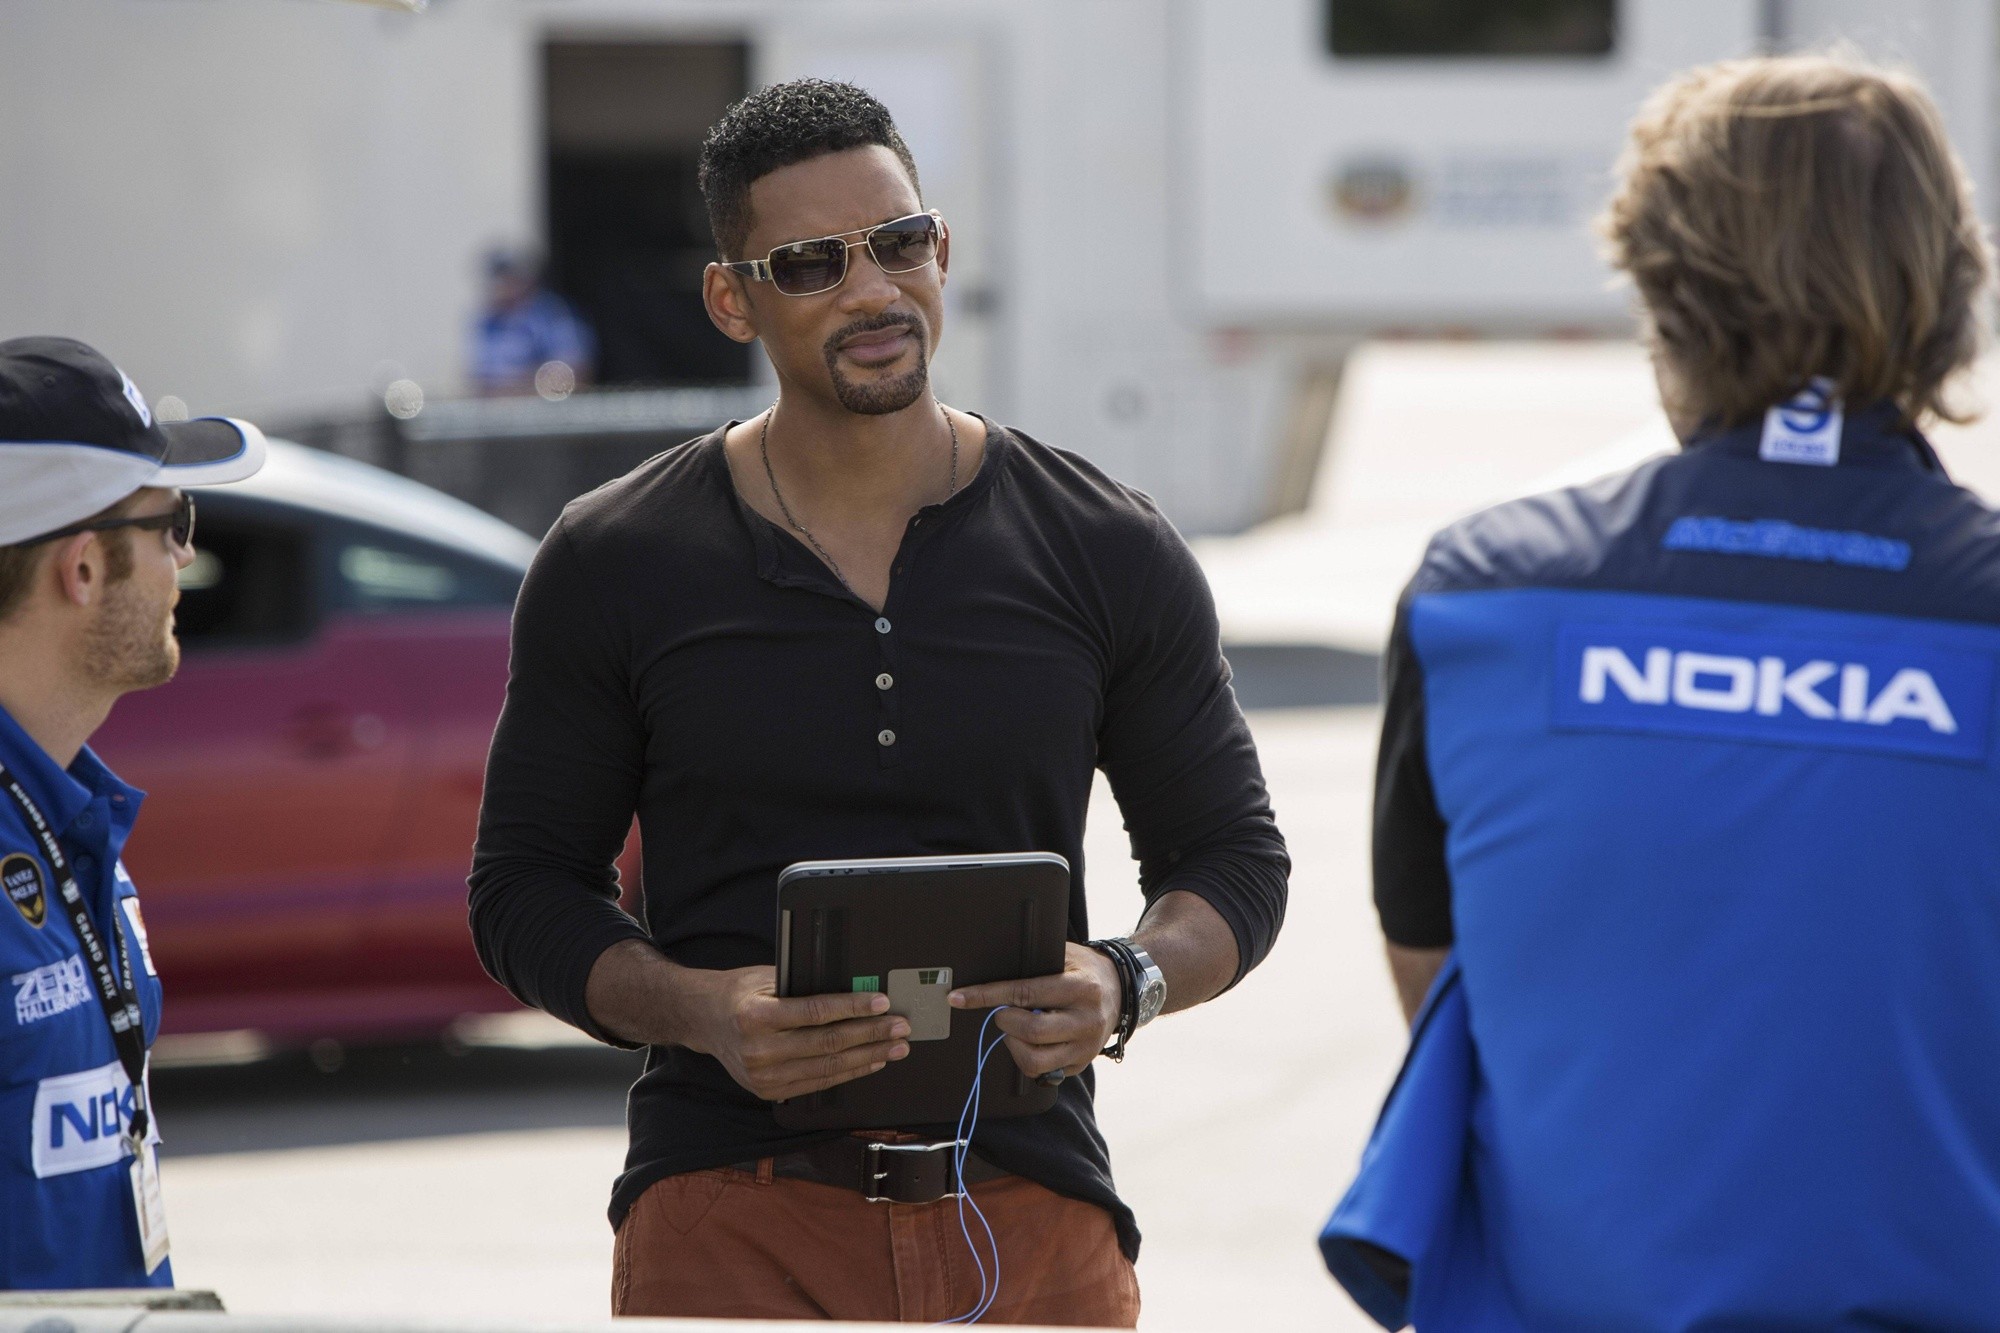 Will Smith stars as Nicky in Warner Bros. Pictures' Focus (2015)